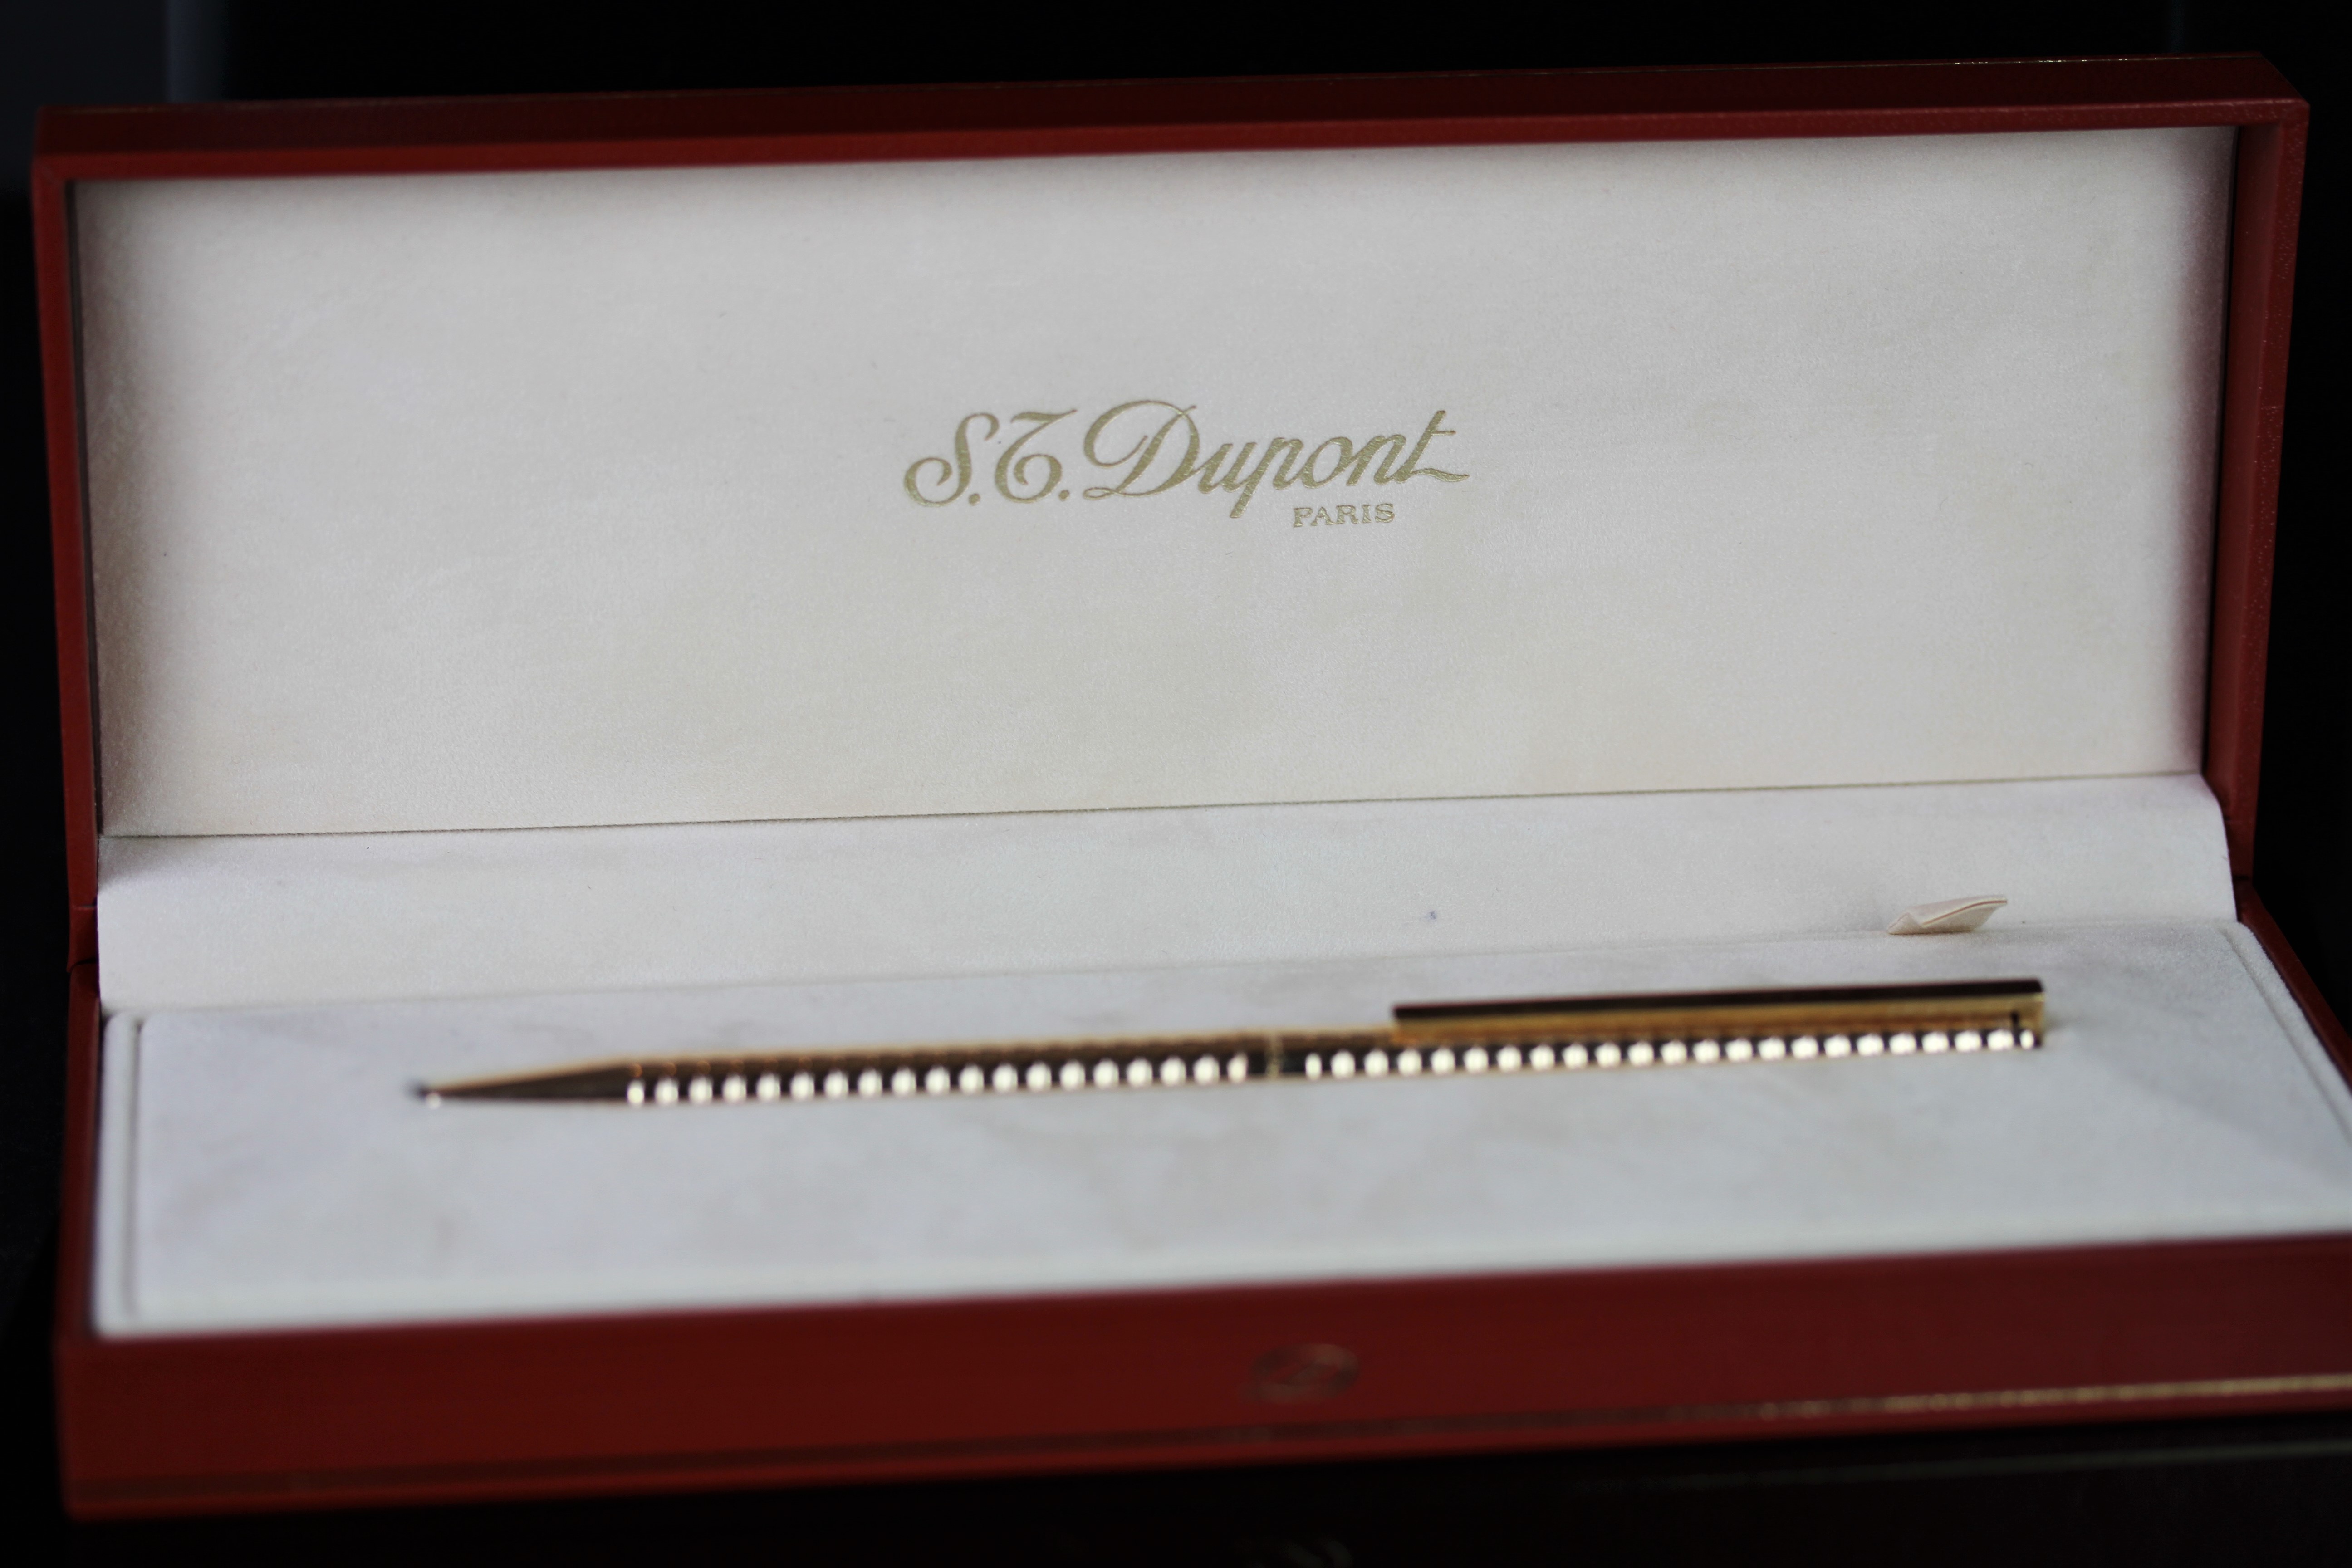 S.T. DUPONT PARIS GOLD PLAQUE PENS W/ BOX AND PAPERWORK, the pen is roughly 13.5cm in length and